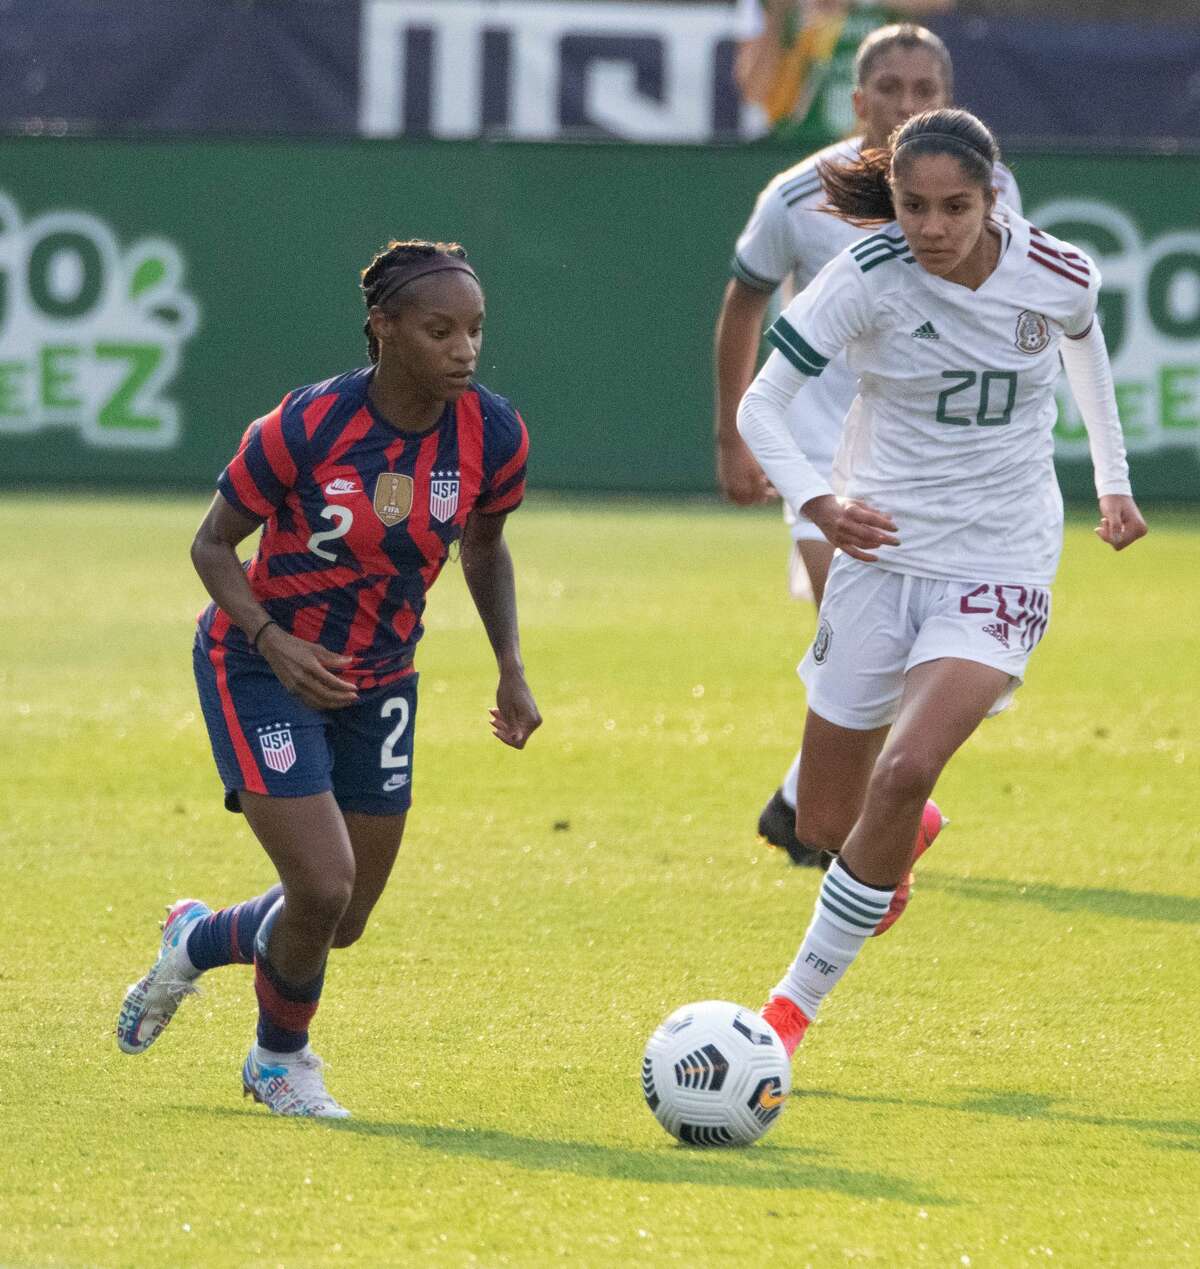 Crystal Dunn of the US Women's Soccer National Team and Mexico's Alison Gonzalez during a Send-Off Series match against Mexico at Pratt & Whitney Stadium in East Hartford, Conn. on Monday, July 5, 2021. The U.S. won 4-0 over Mexico. (Joyce Bassett / Special to the Times Union)